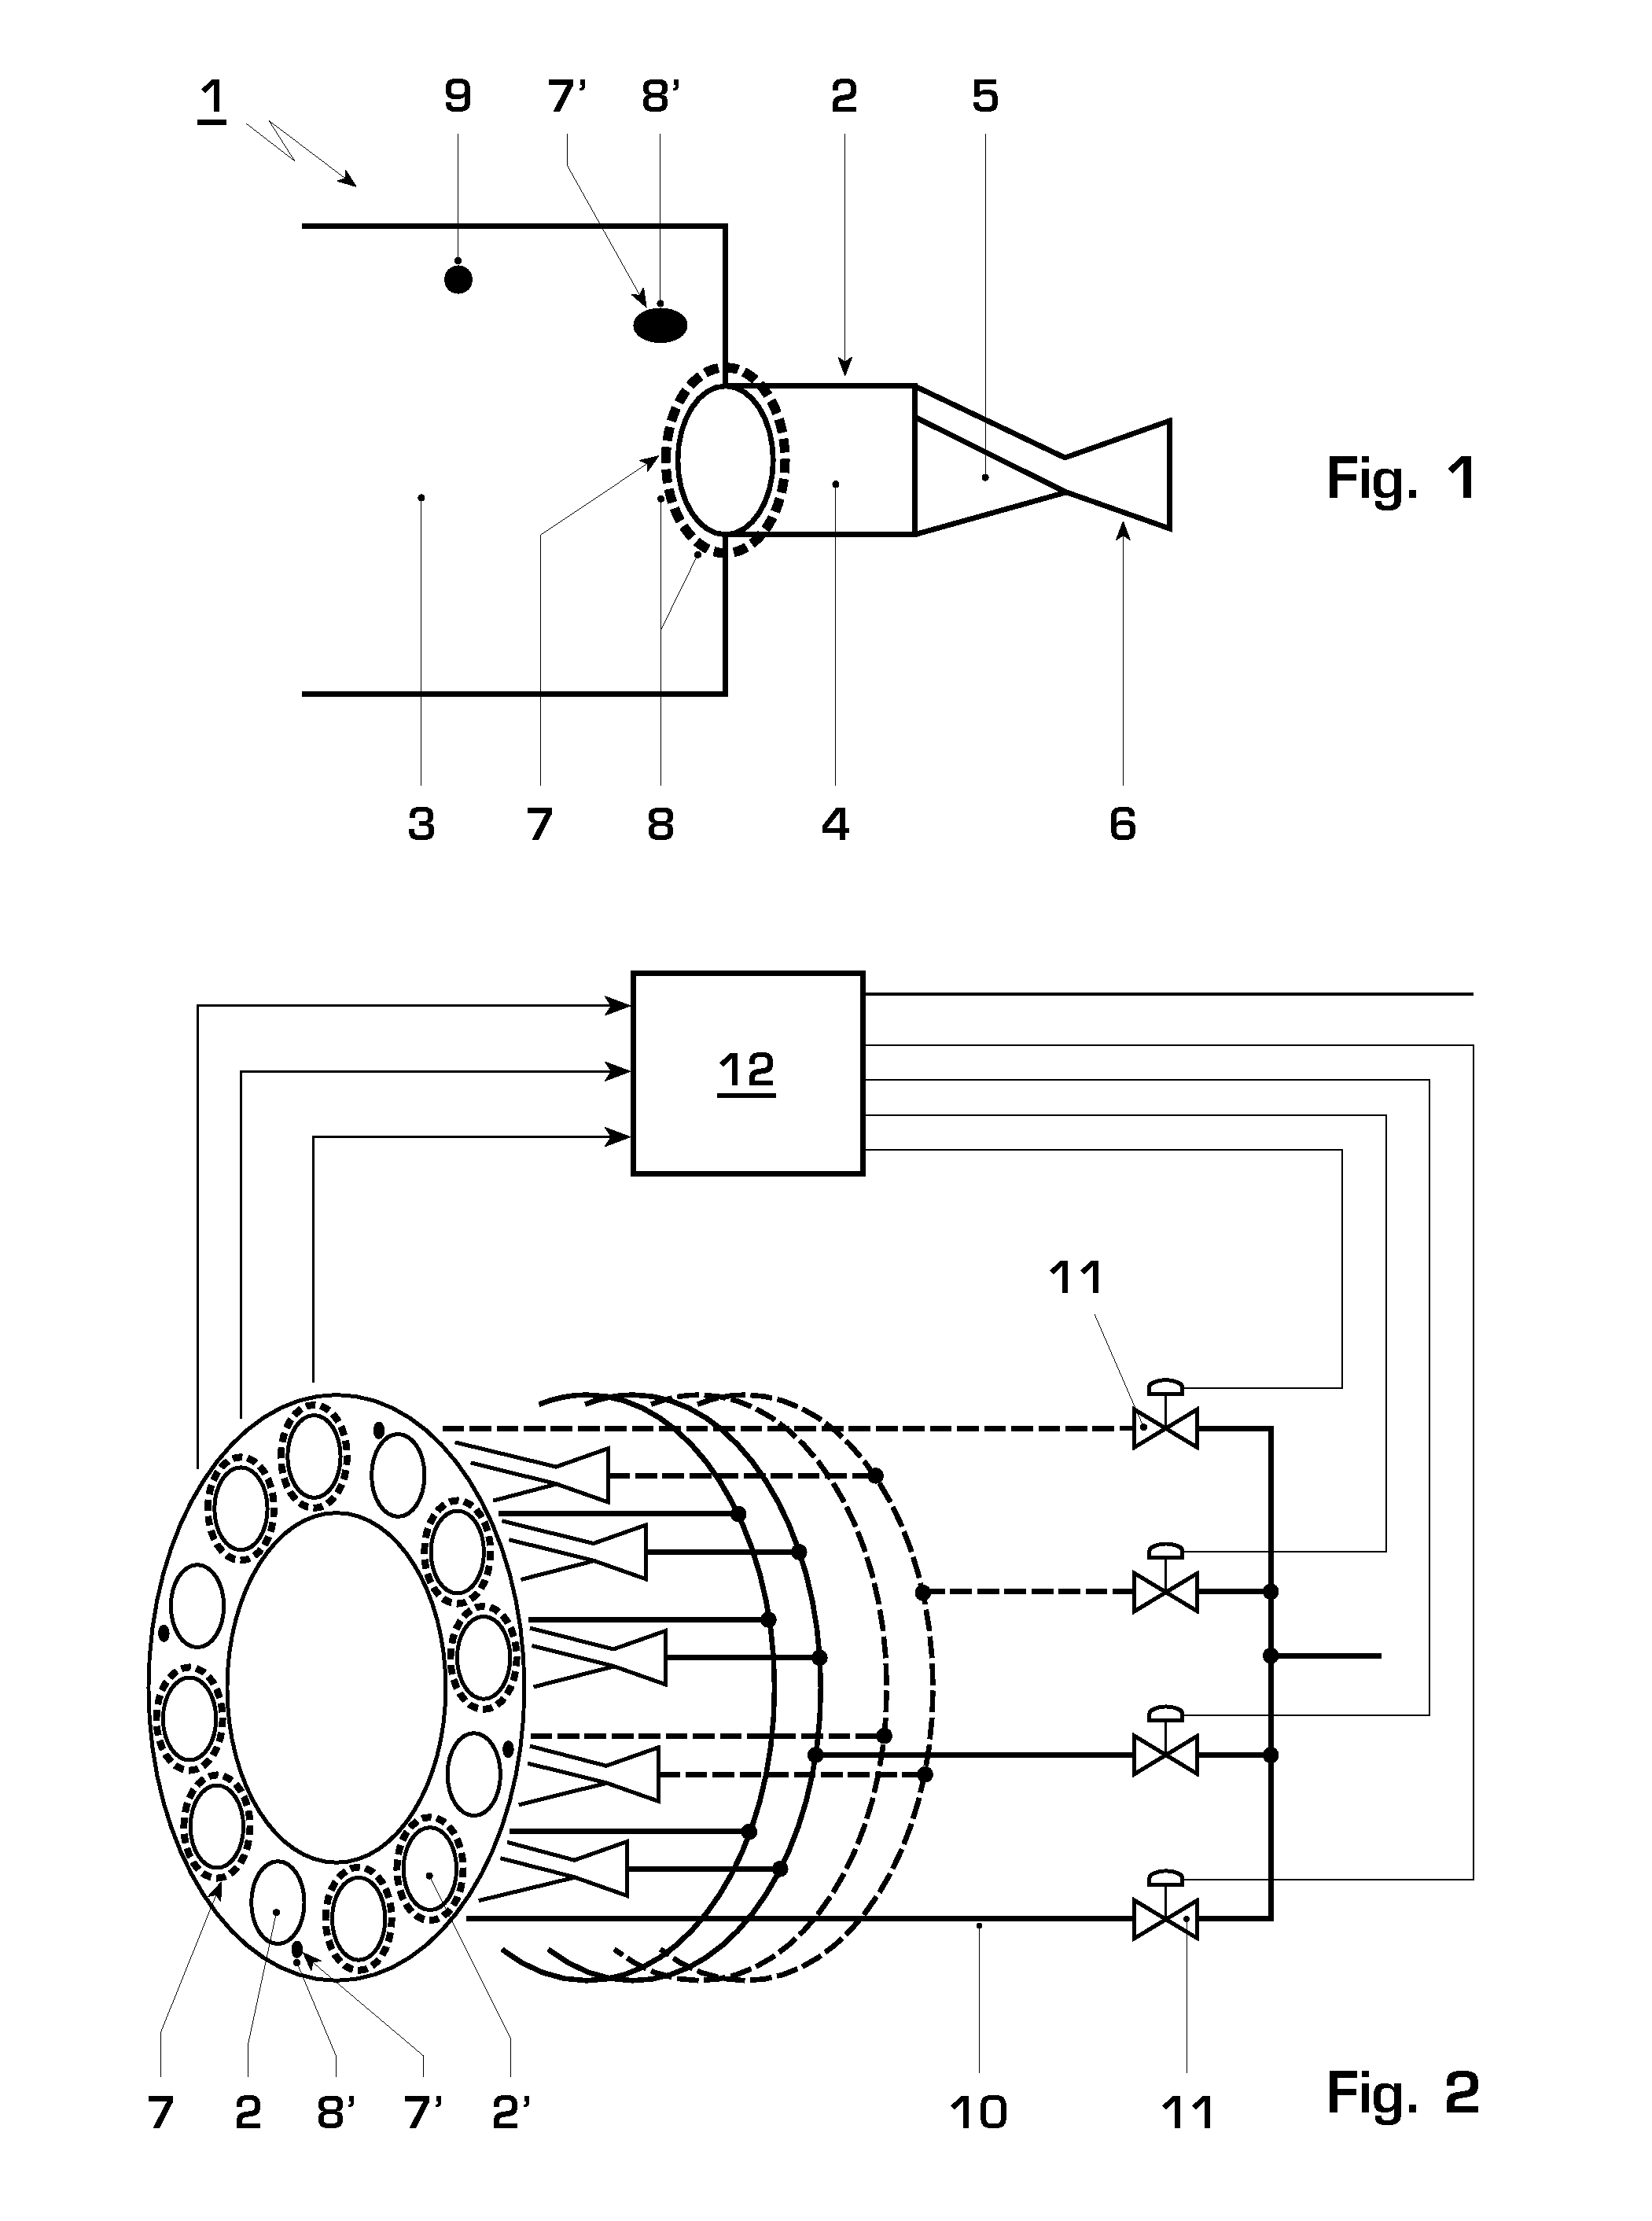 Burner system with staged fuel injection